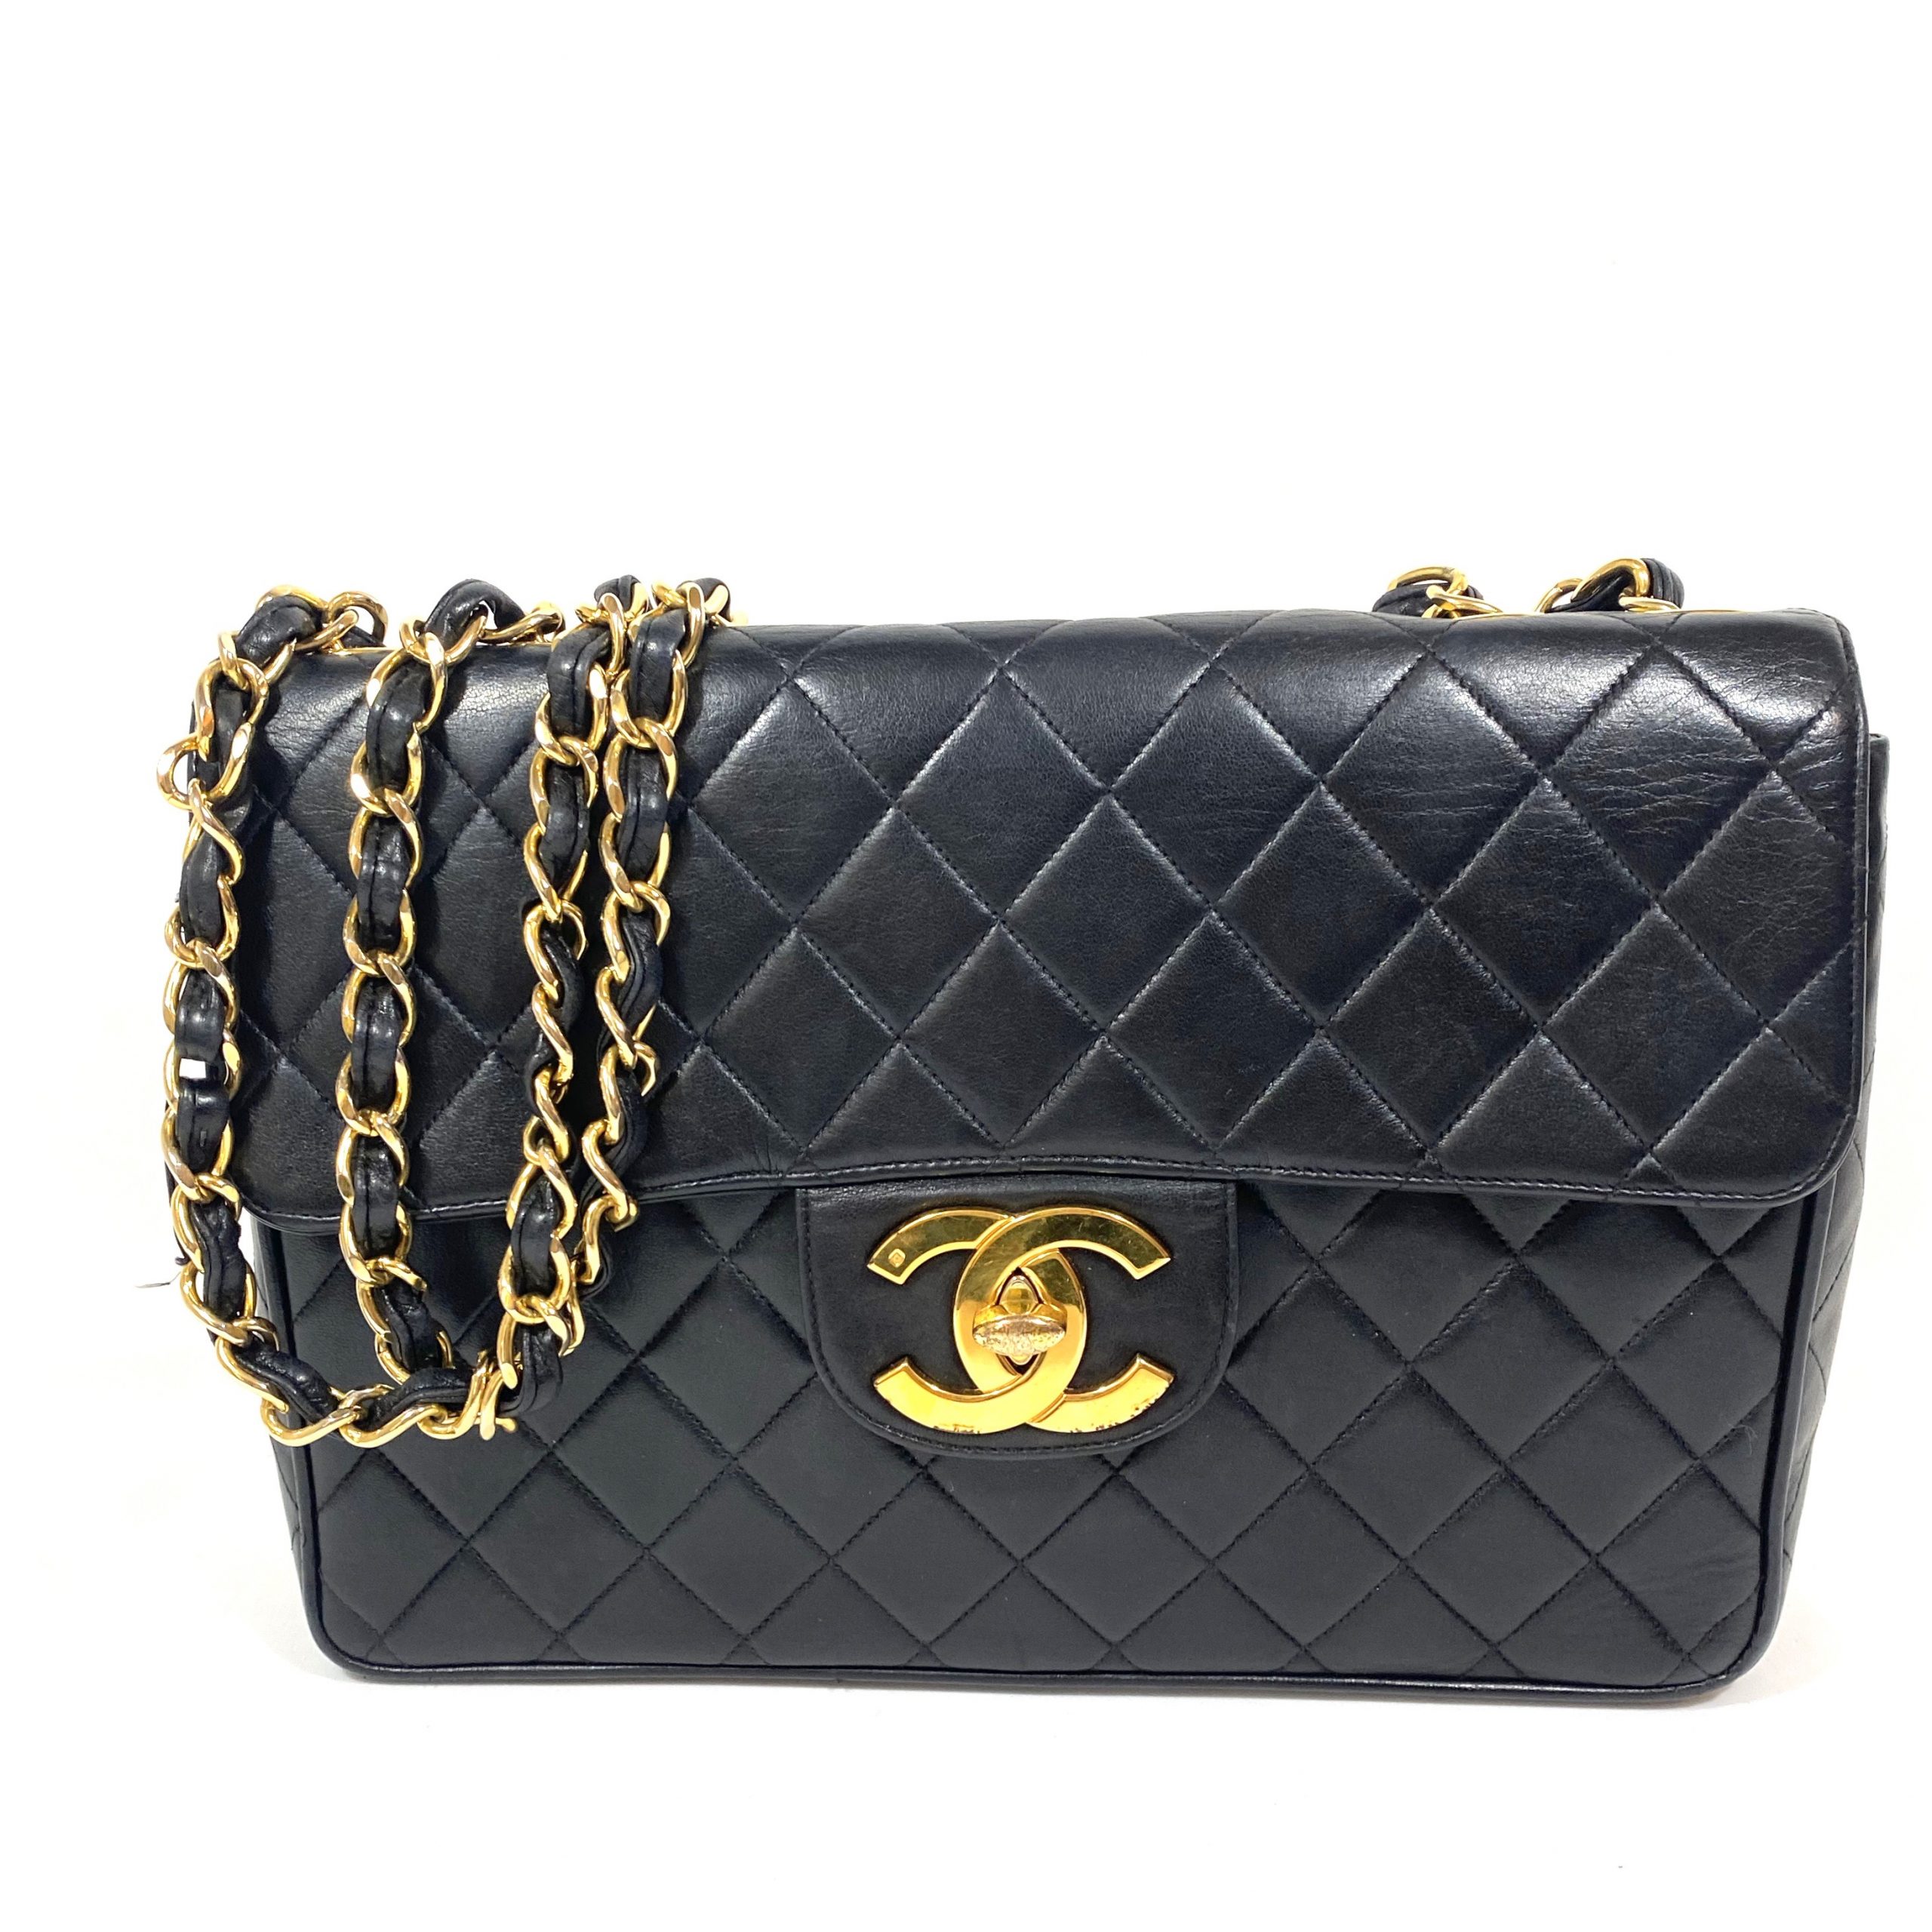 CHANEL JUMBO QUILTED SINGLE BLACK FLAP SHOULDER BAG - Still in fashion